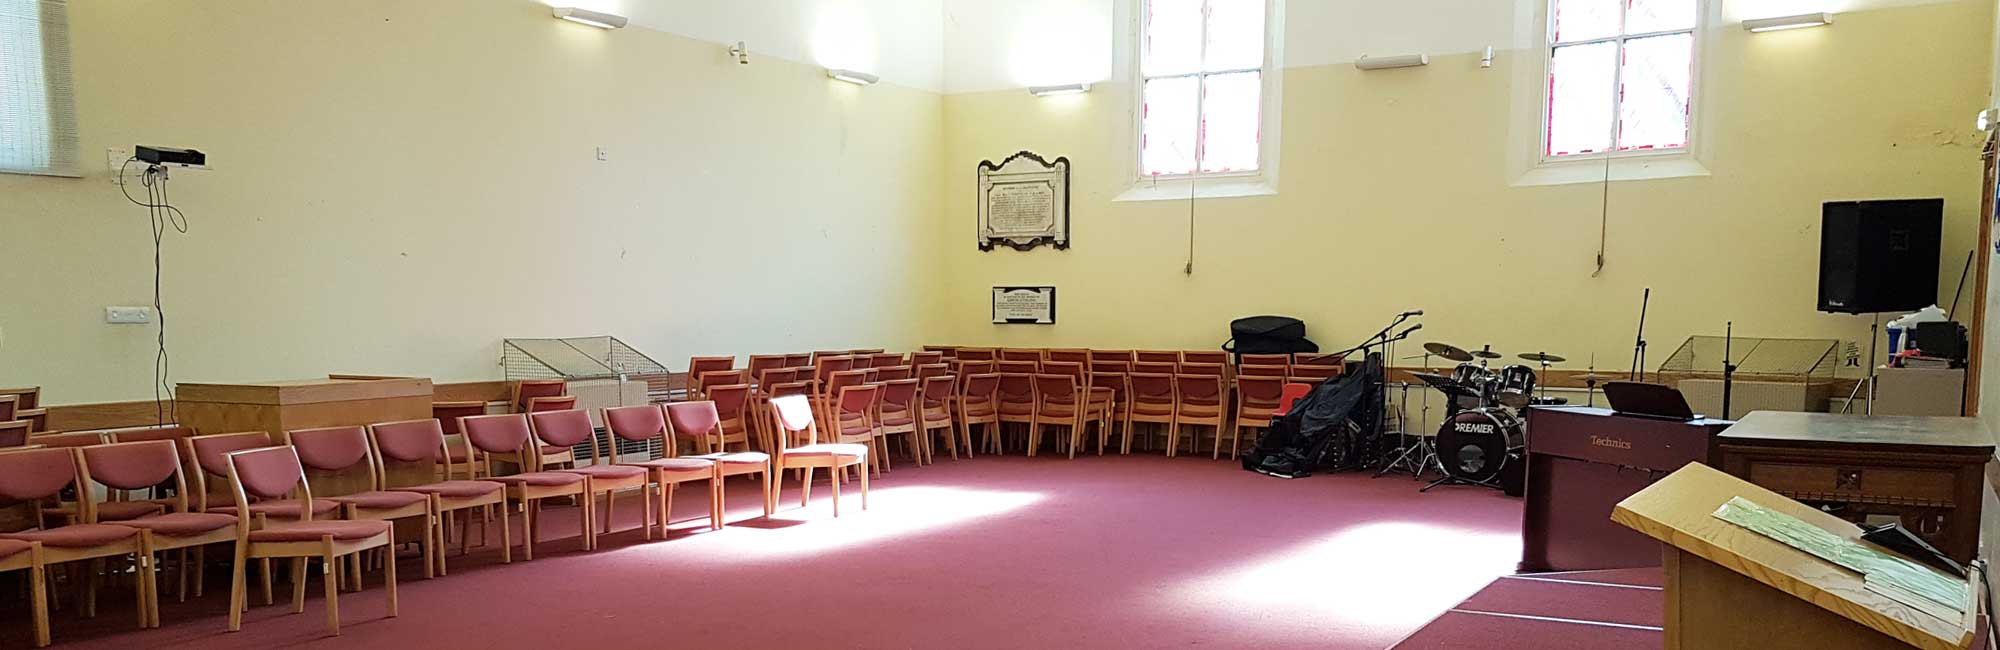 Image of the chapel at St Peter's Baptist Church